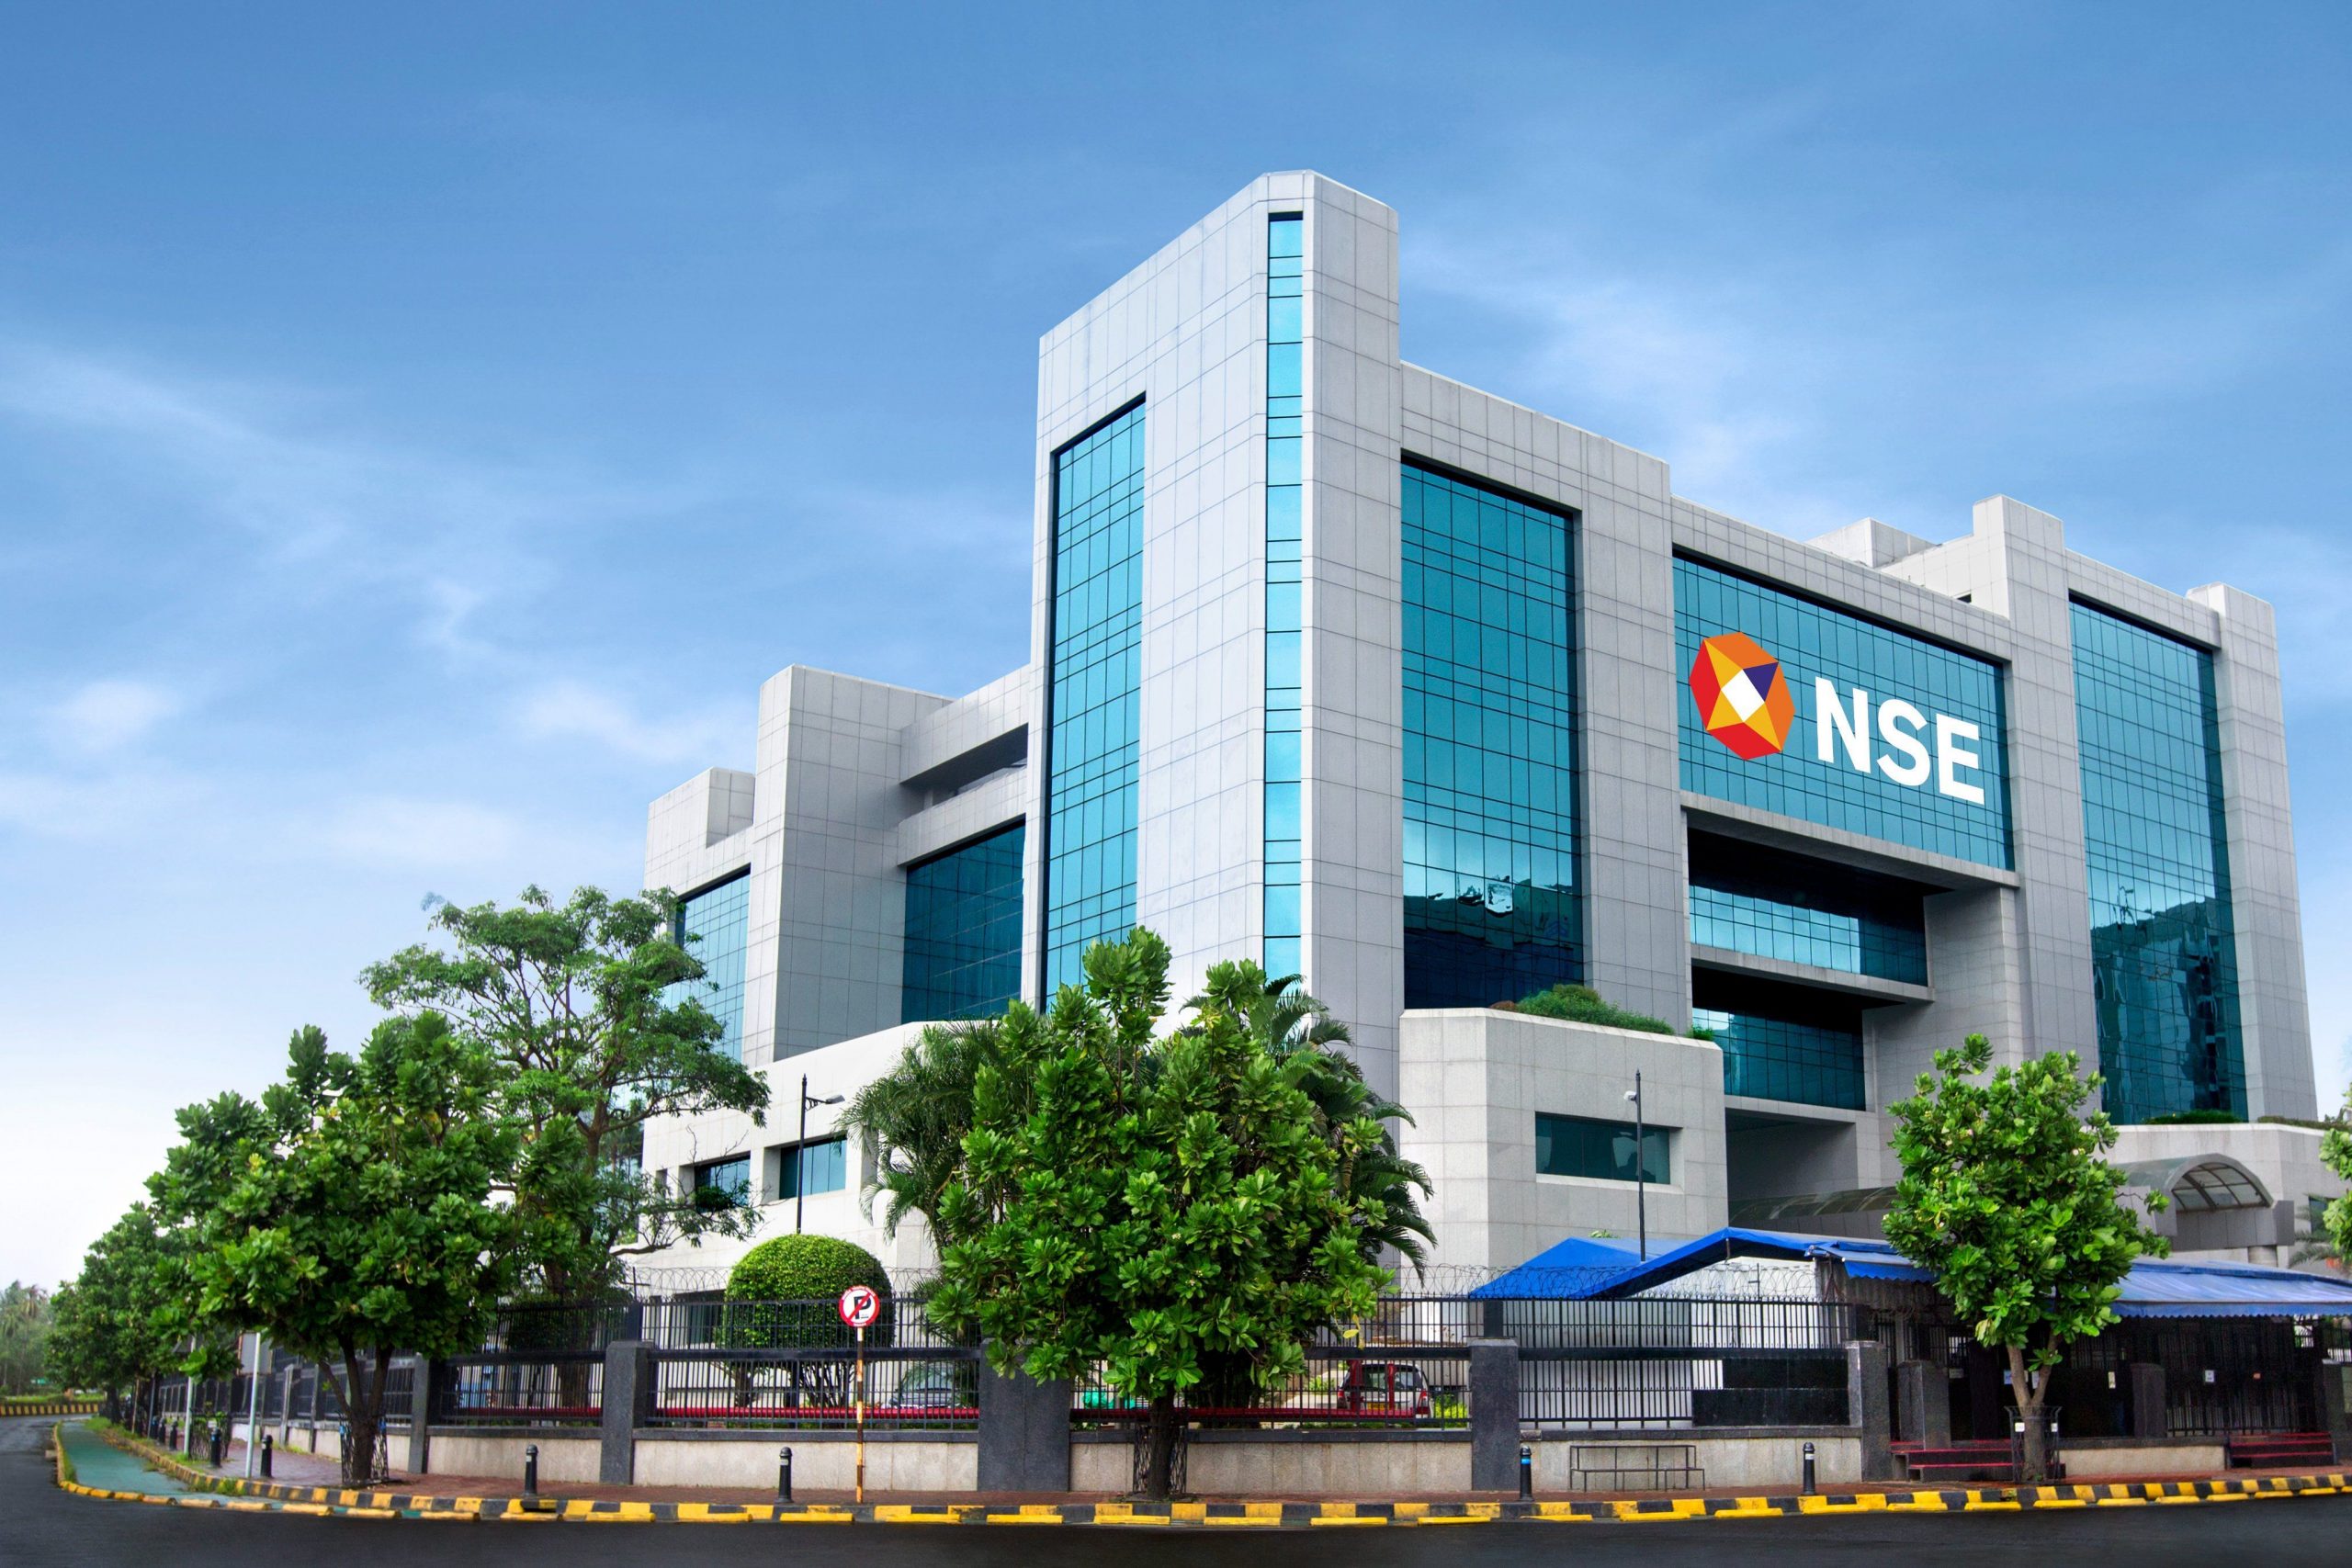 NSE F&O Ban: Balrampur Chini and others under ban on Wednesday, August 10, 2022